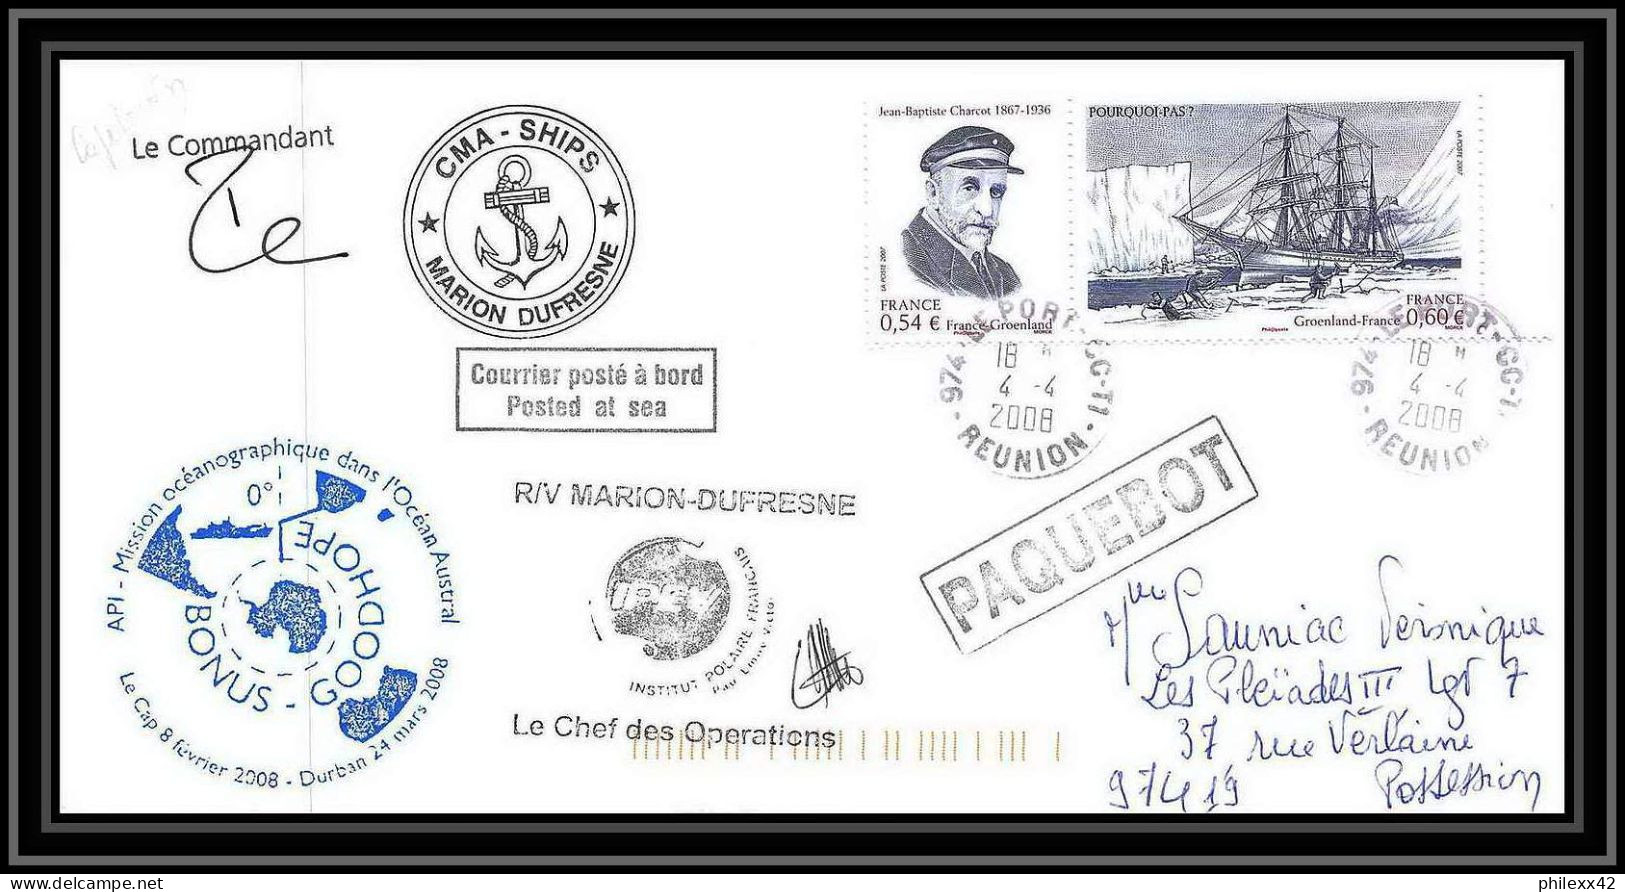 2775 ANTARCTIC Terres Australes TAAF Lettre Cover Dufresne 2 Signé Signed Capetown 4/4/2008 - Antarktis-Expeditionen